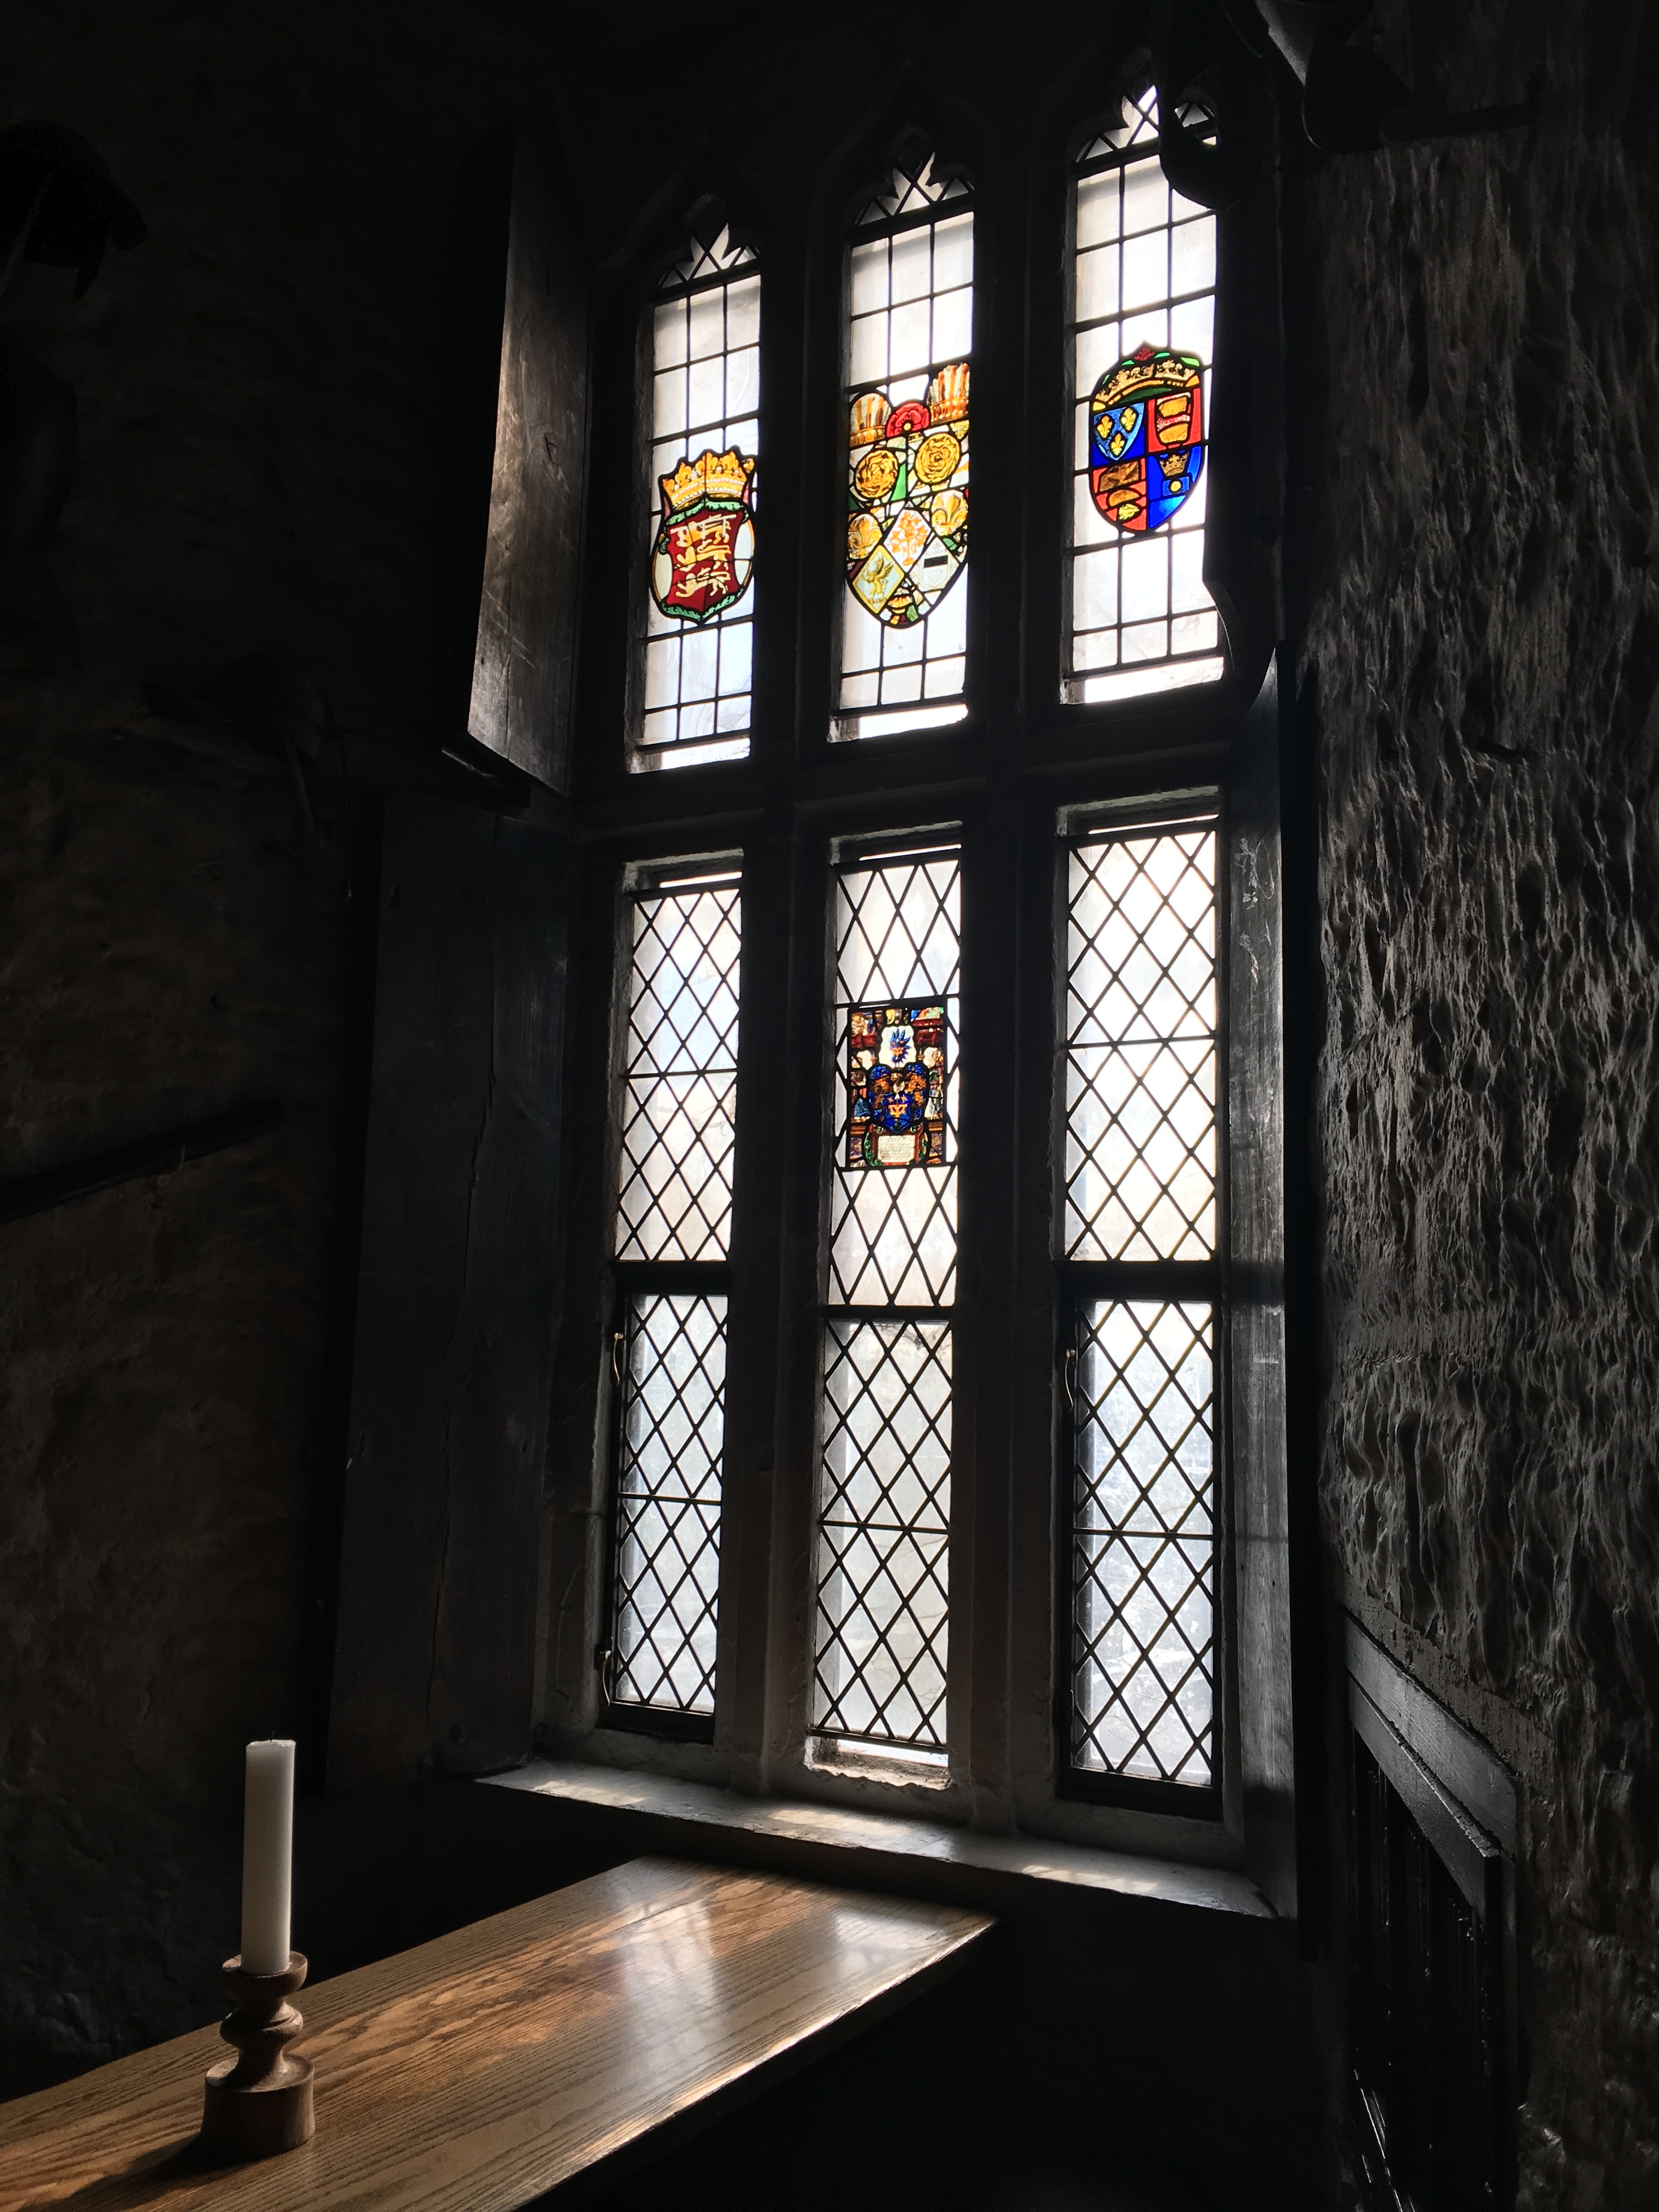 Stained glass window inside Bunratty Castle